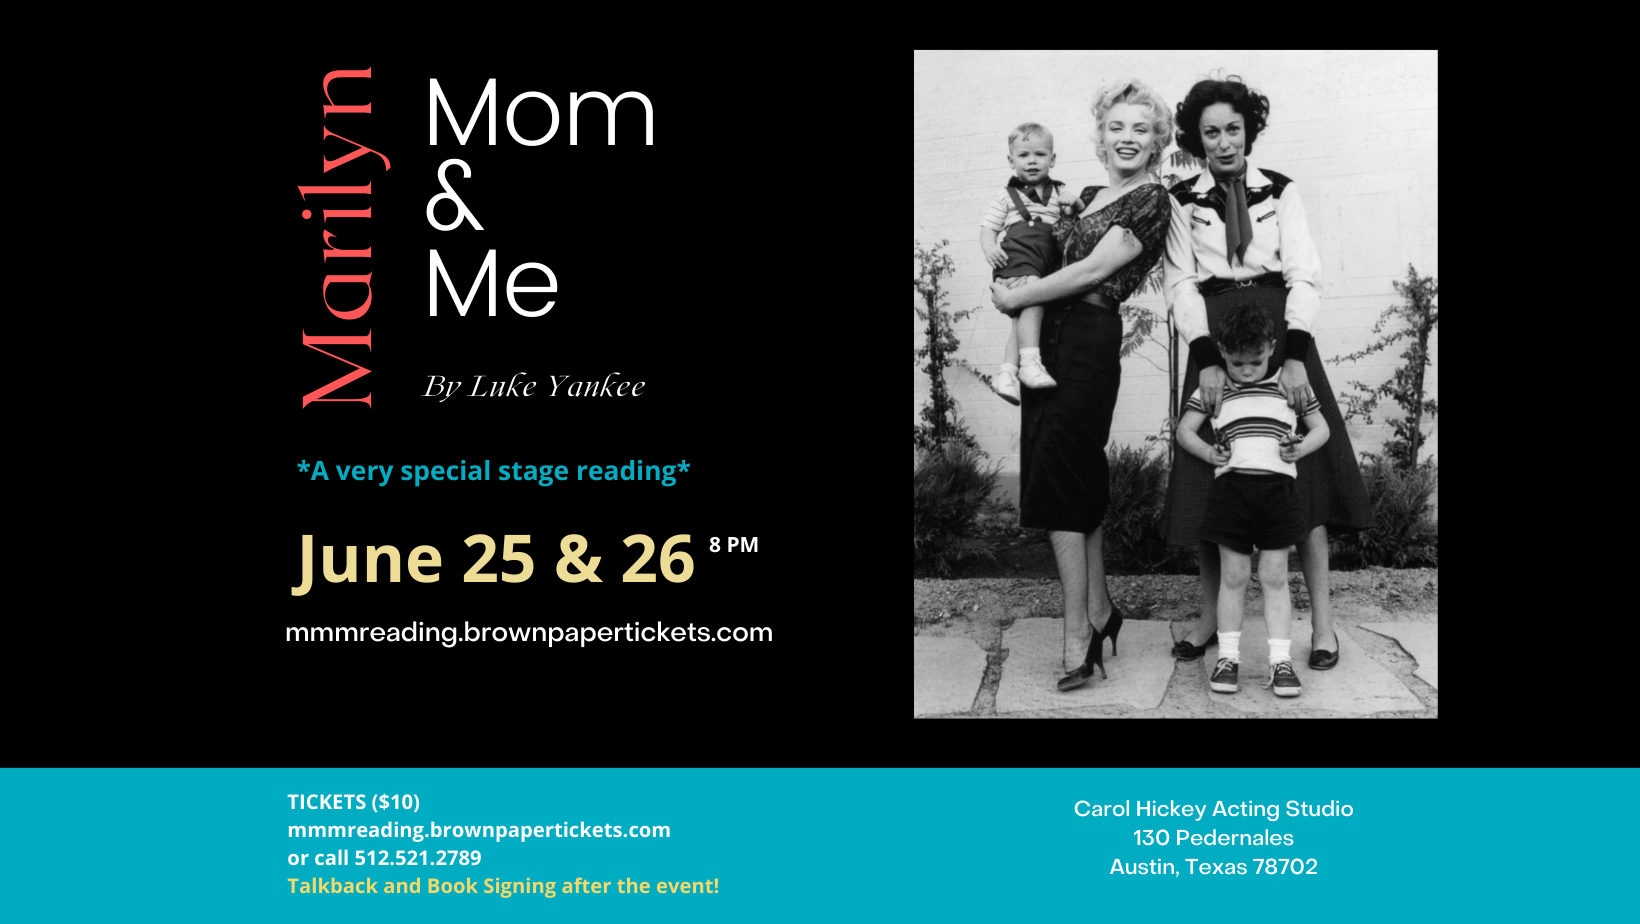 Marilyn, Mom & Me by Southwest Theatre Productions